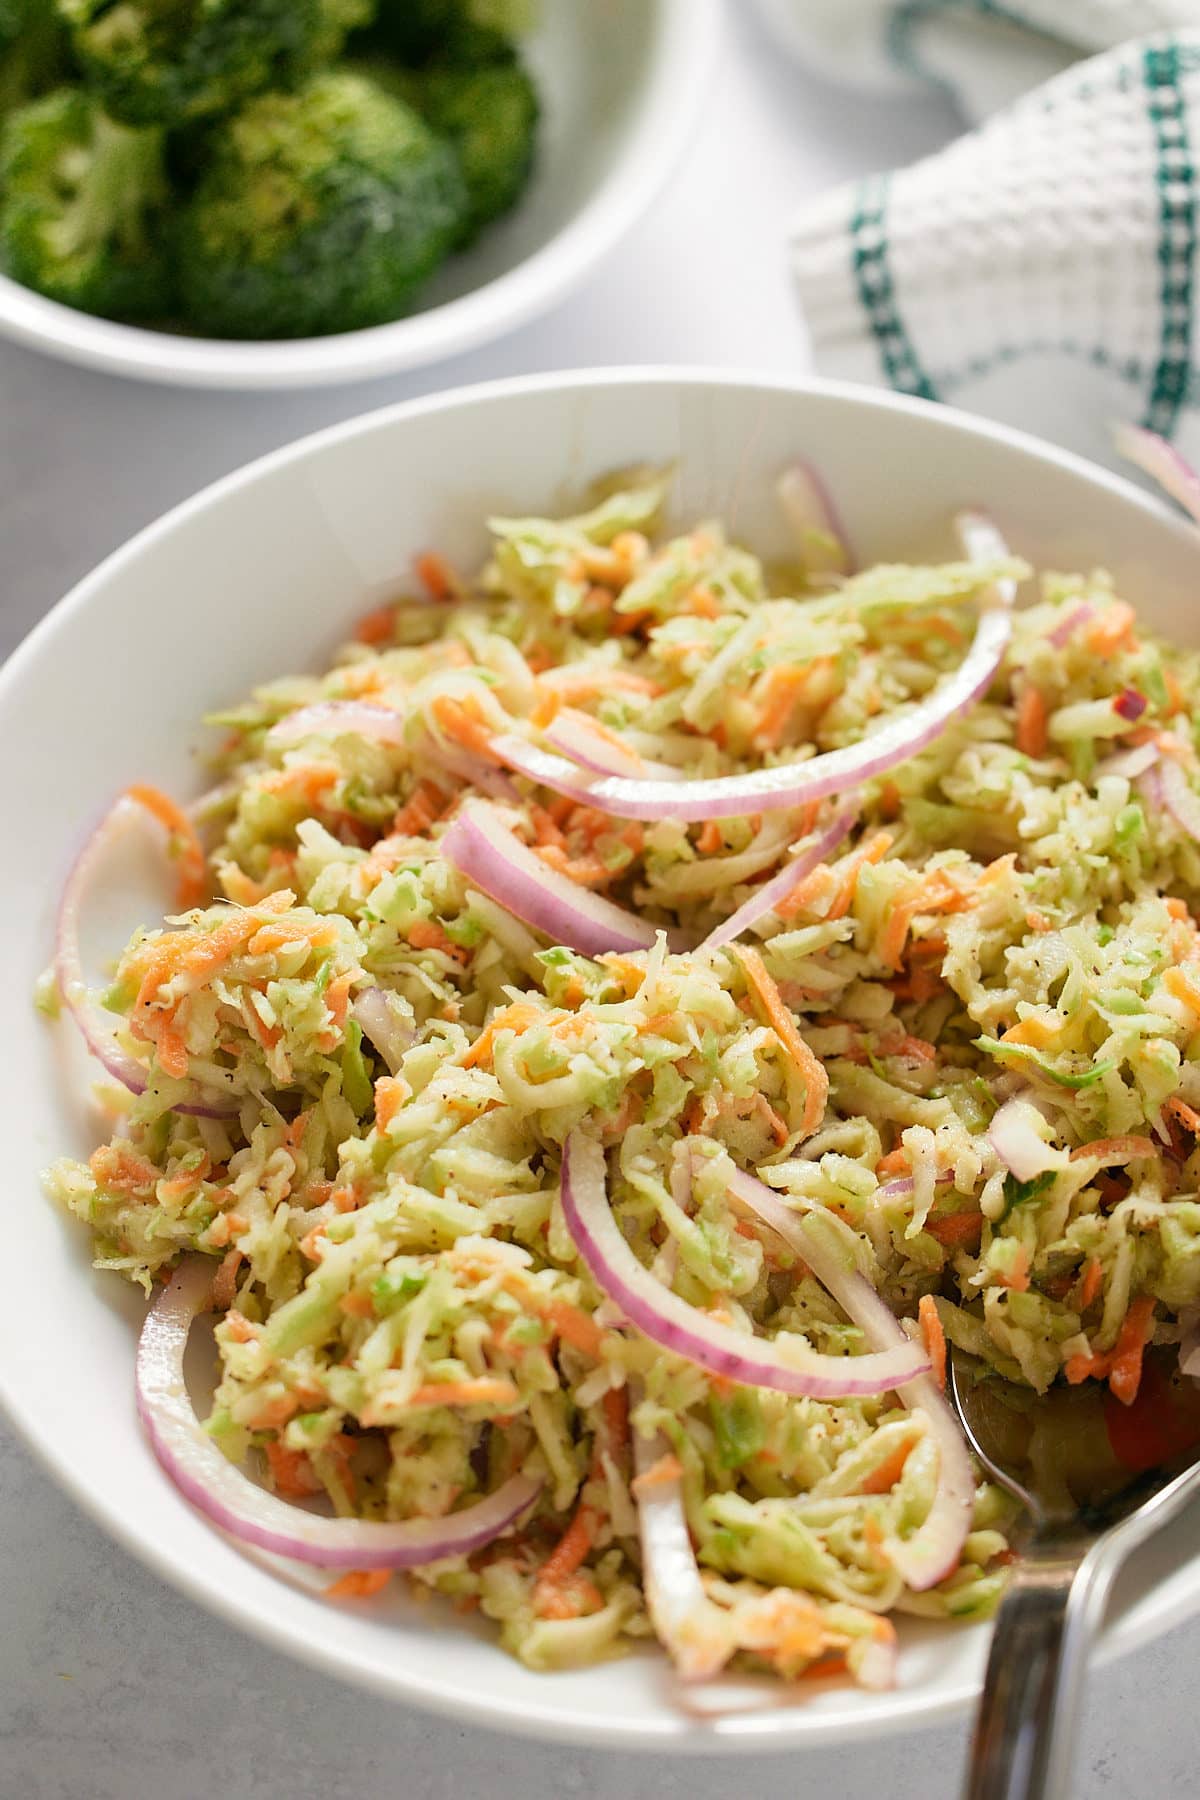 Red onion and broccoli slaw in a white bowl.